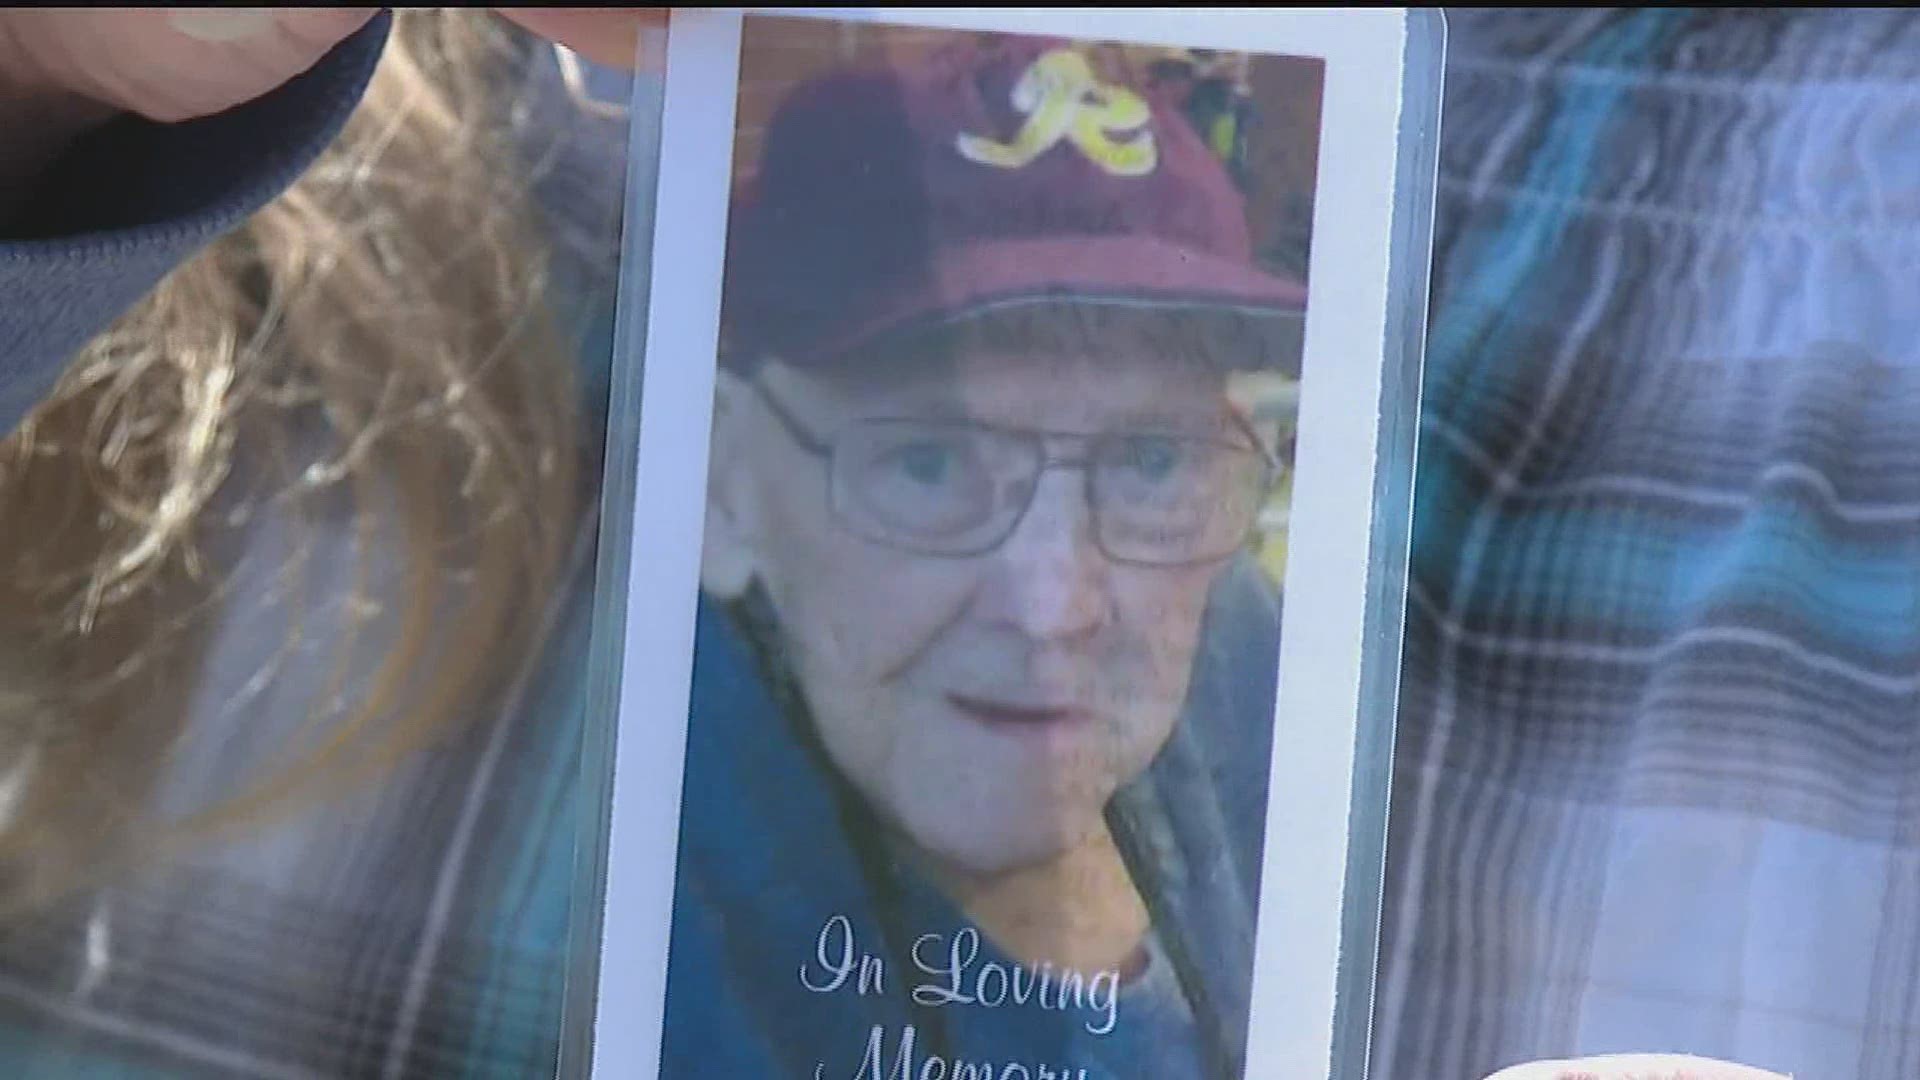 Several thousand residents in long-term care facilities have died from COVID-19. A Lancaster family who had to do something they weren't prepared for, say goodbye.